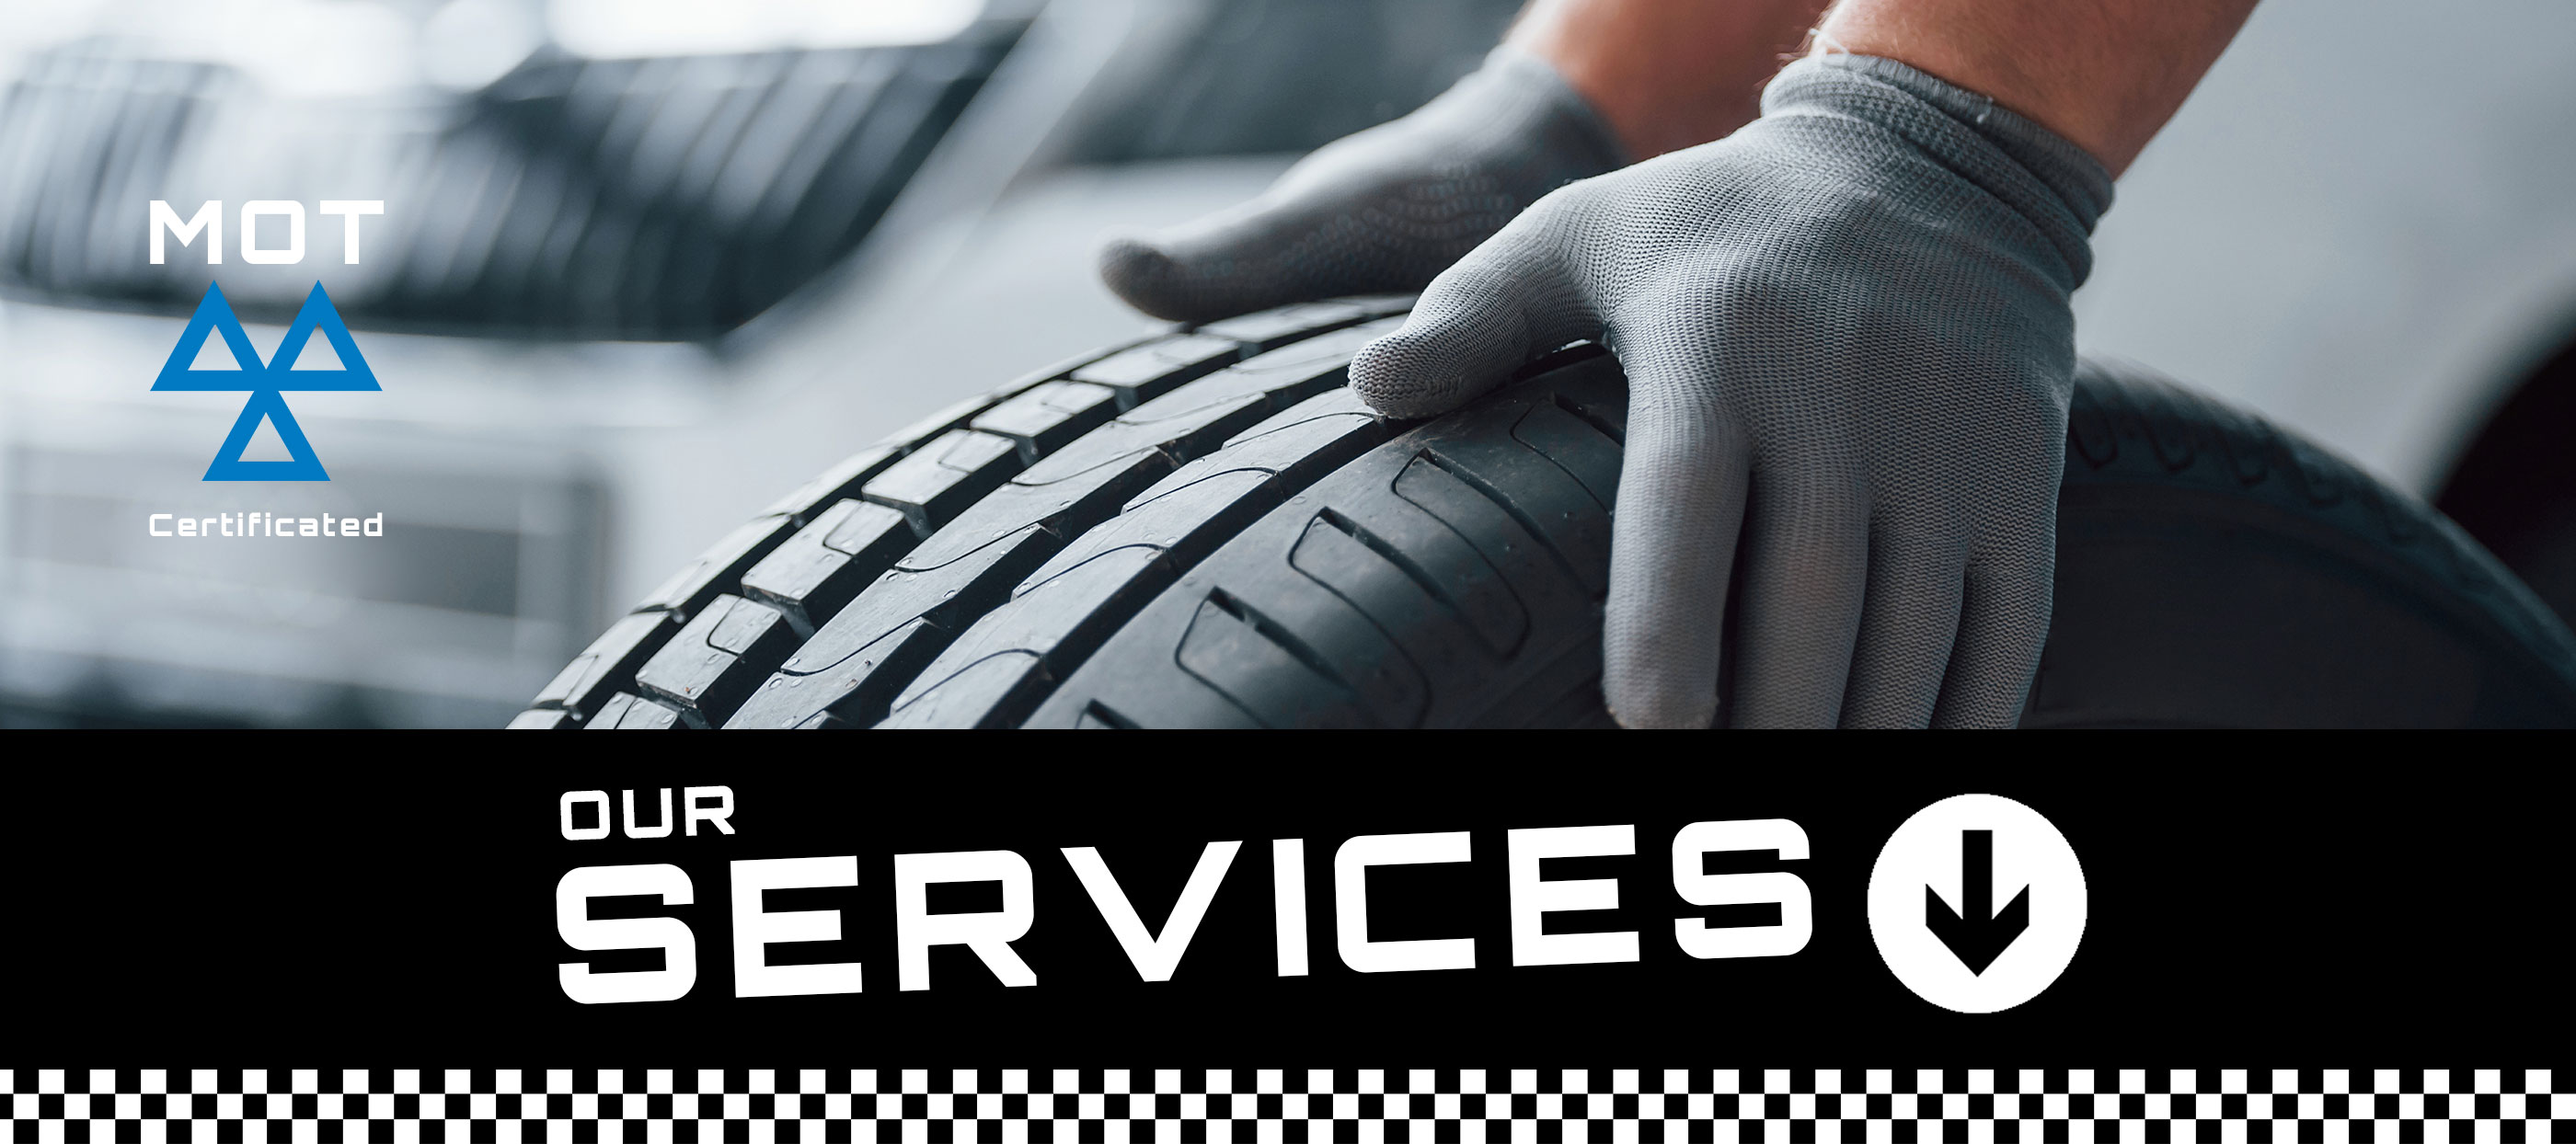 MAB - MOT services & Tyres